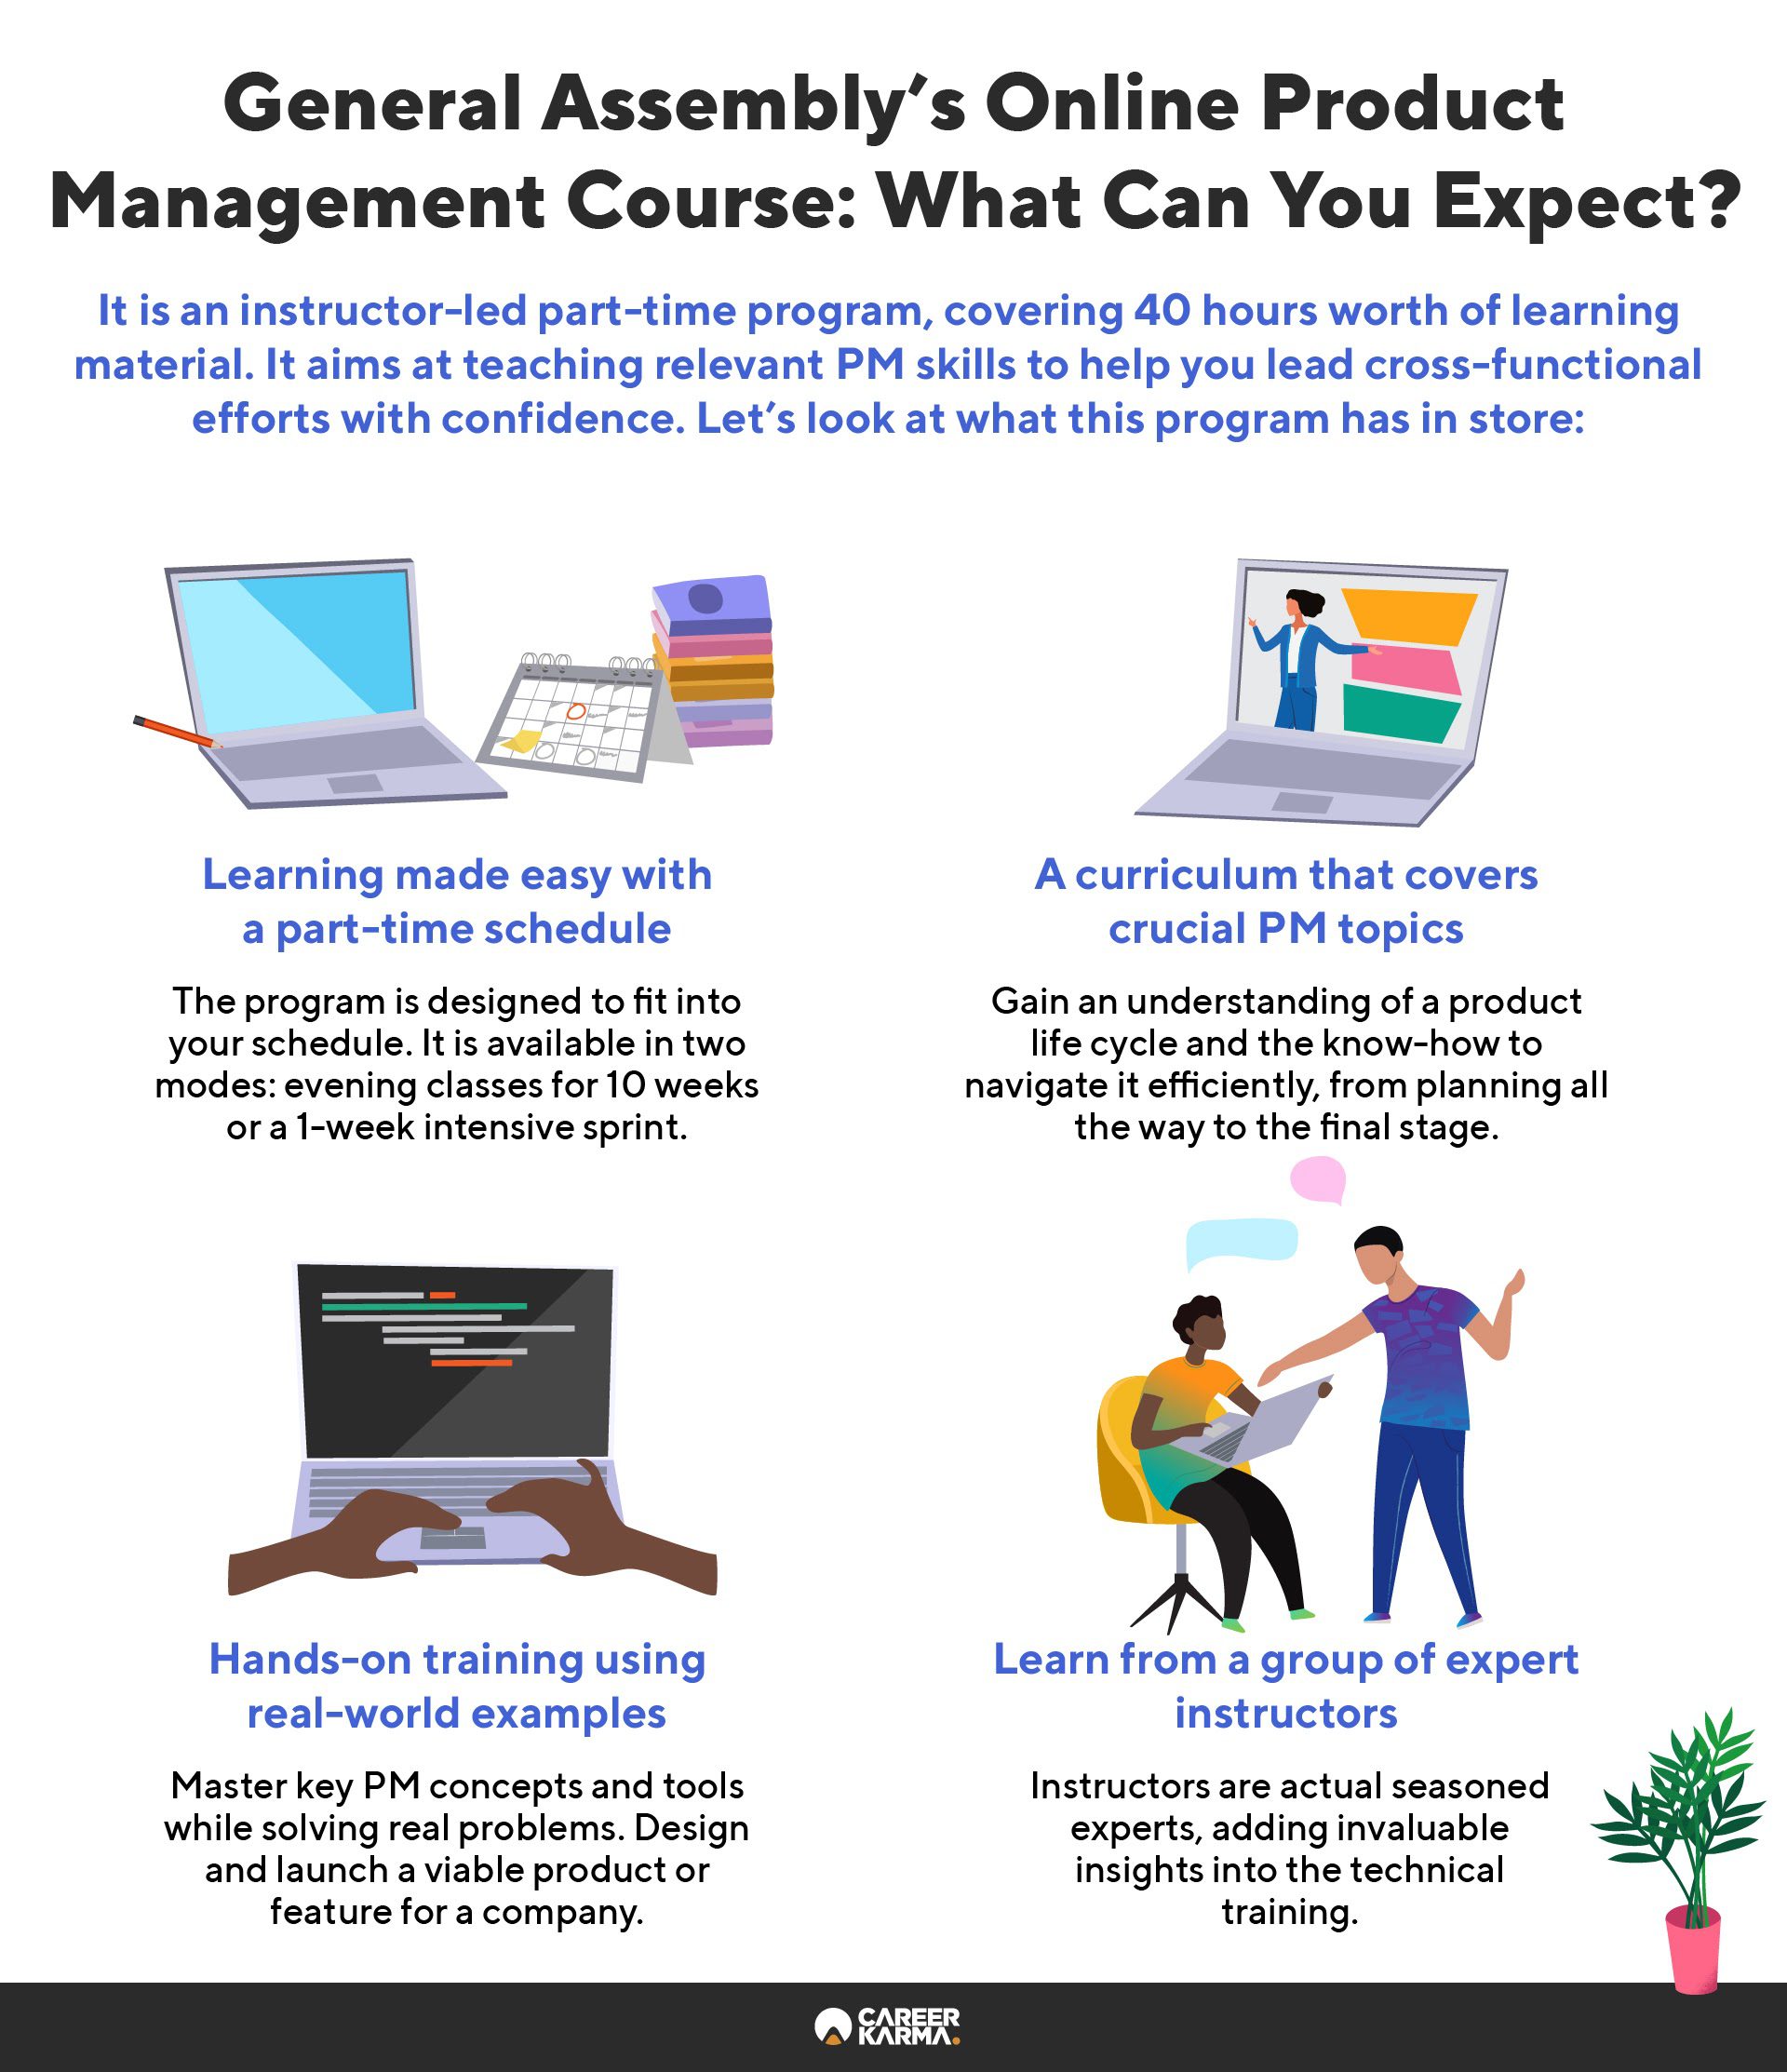 An infographic covering the key features of General Assembly’s online Product Management course